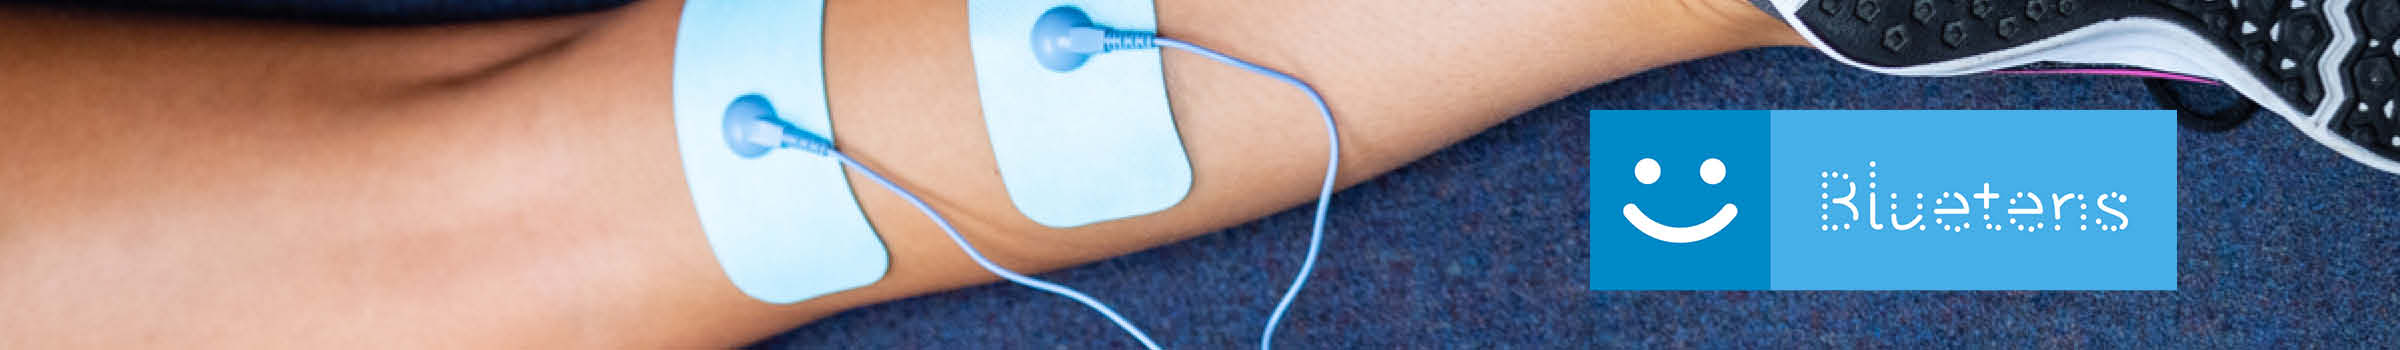 Duo Sport bluetens pack: connected electrotherapy